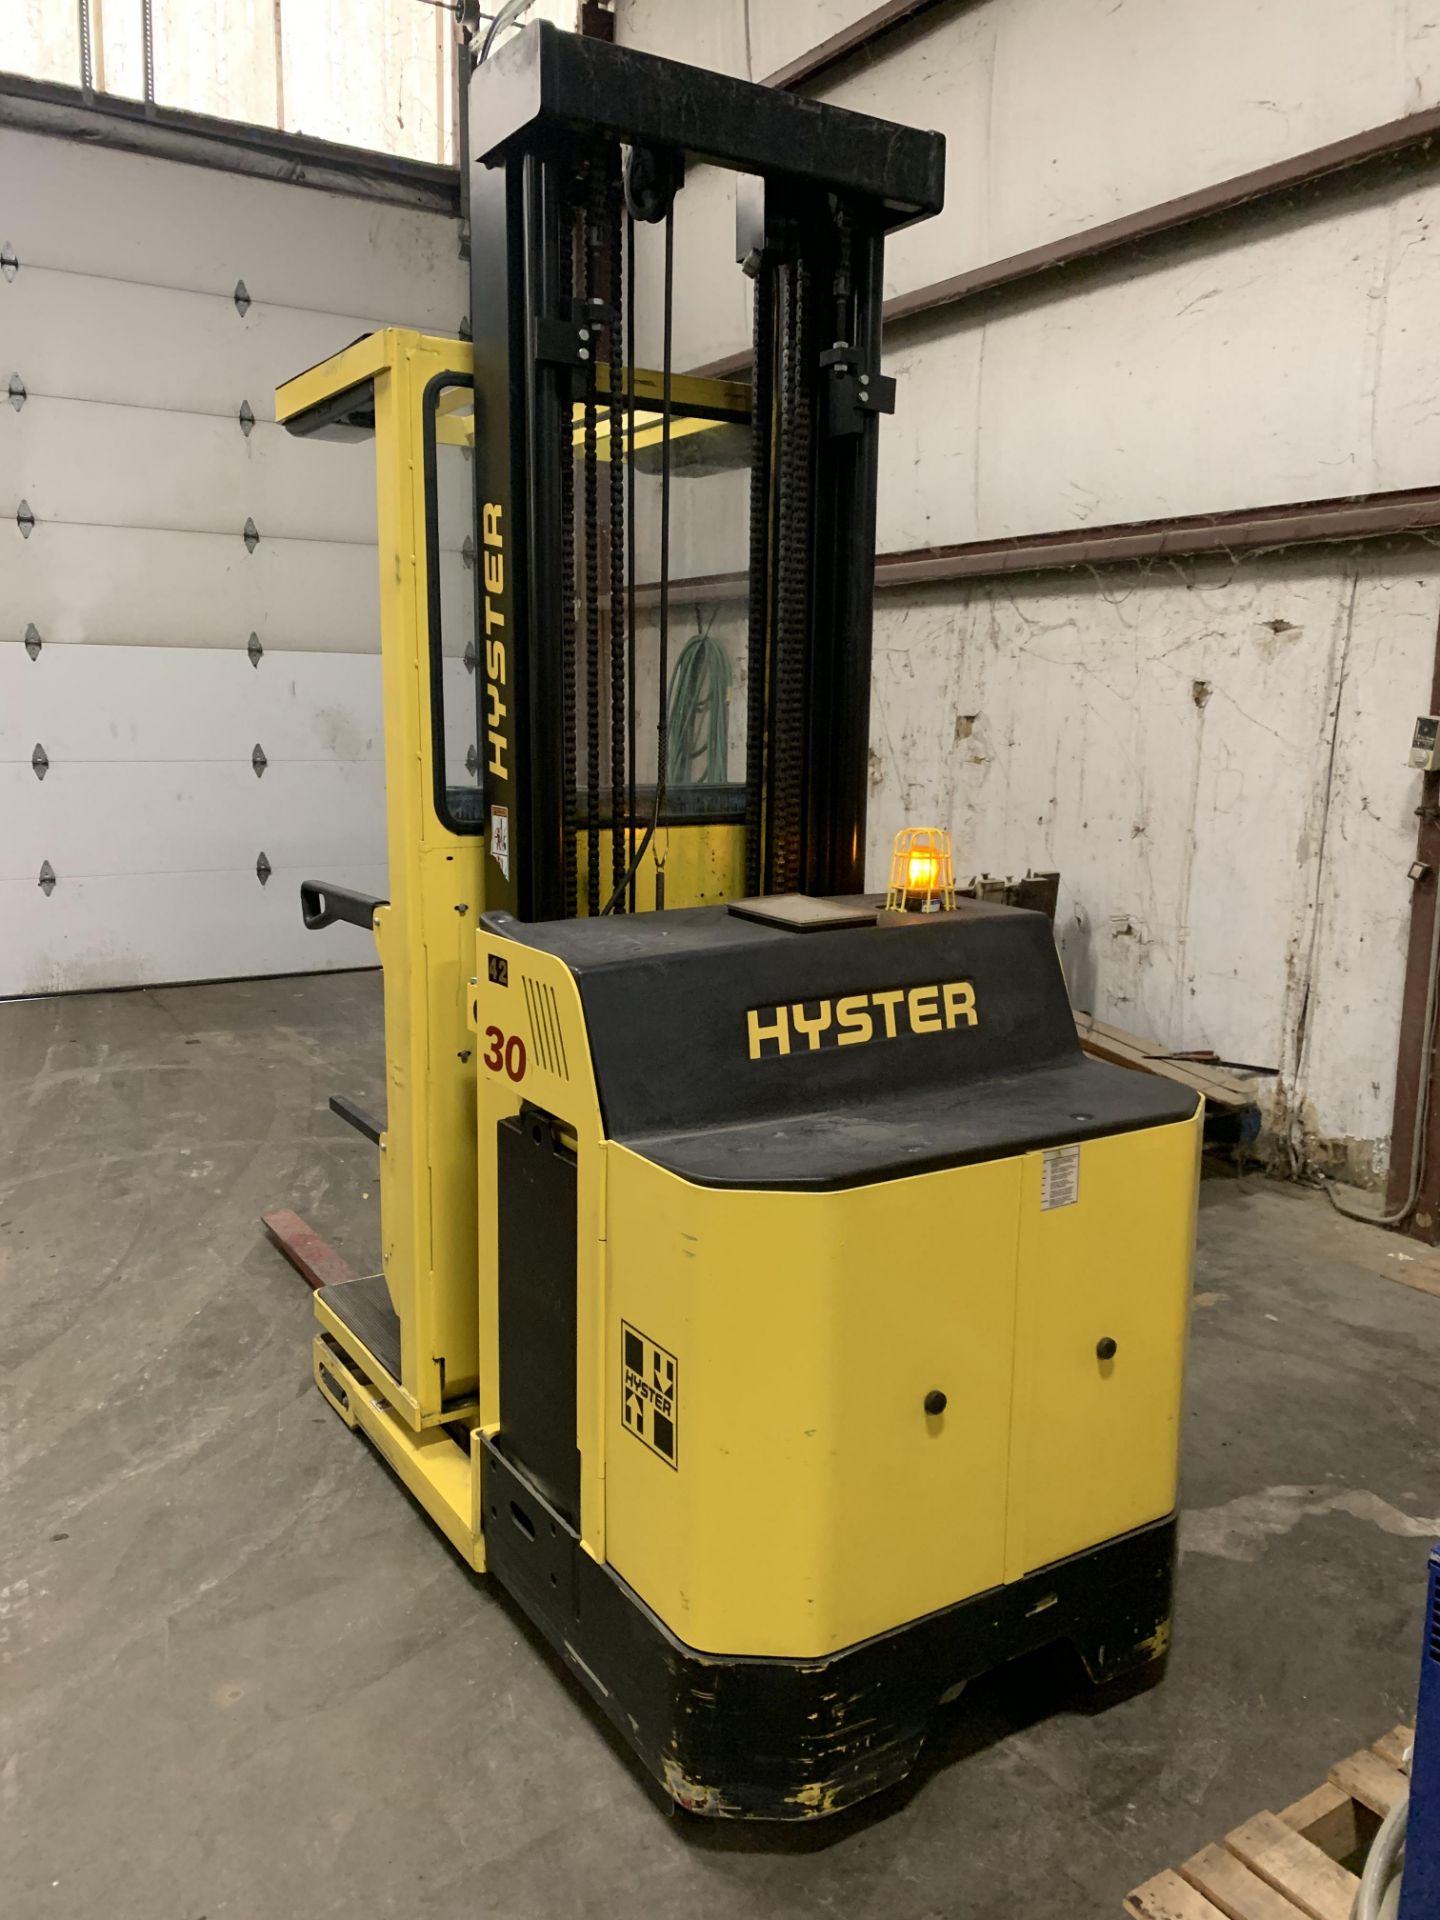 *LOCATED HAMILTON, OH* 2015 HYSTER 3,000-LB. CAP ORDER PICKER, MODEL: R30XM3, 36V, 240" LIFT HEIGHT - Image 2 of 4